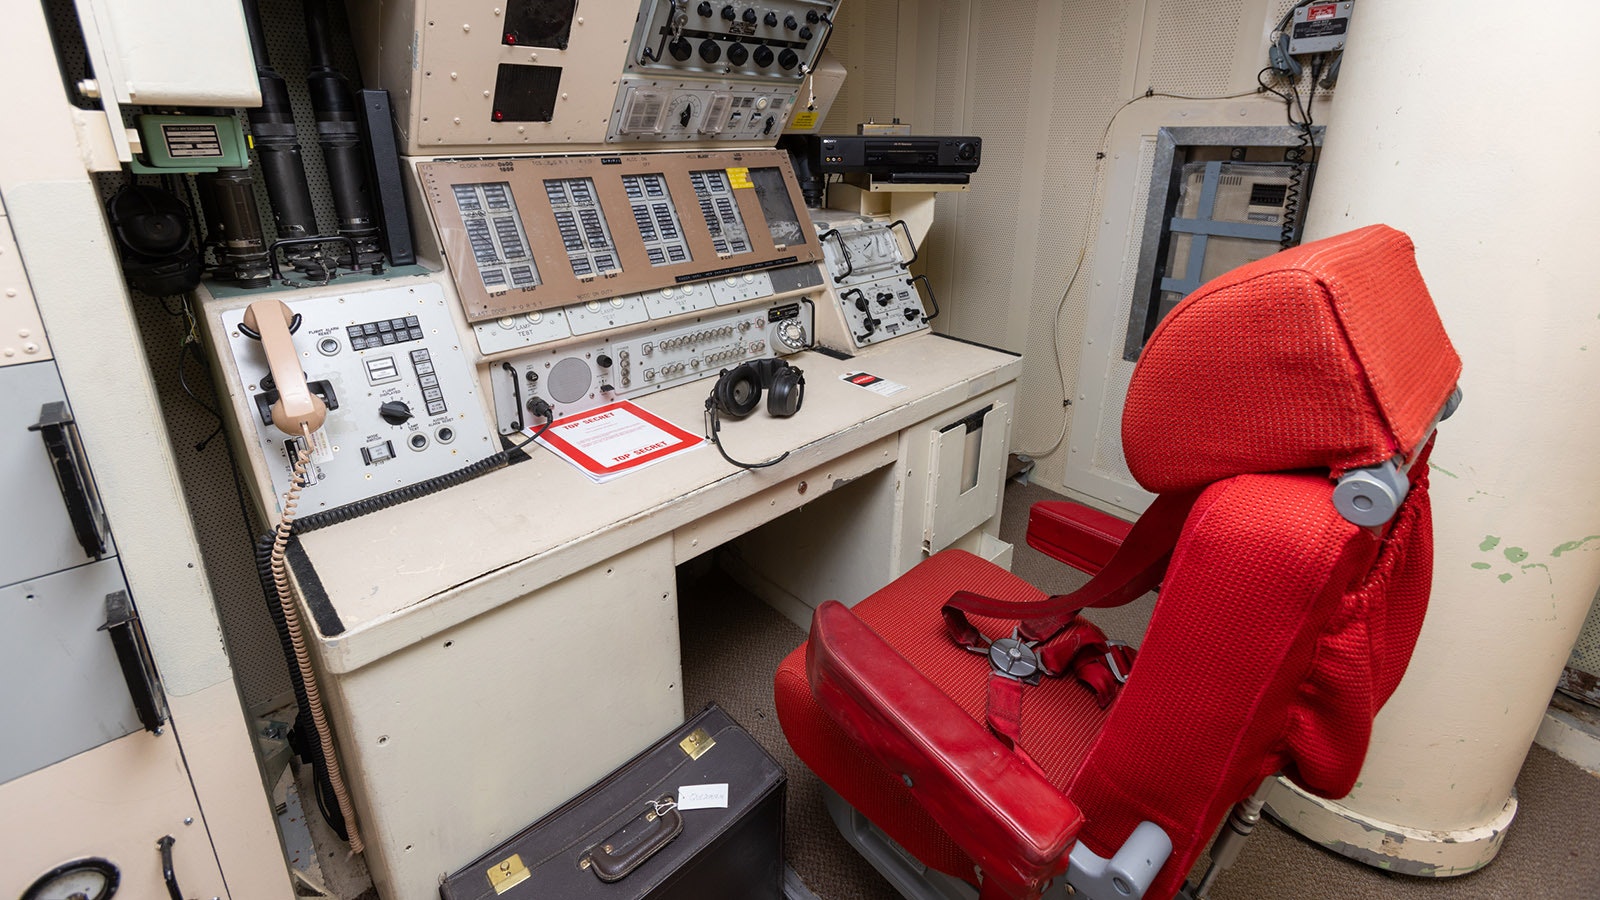 The control panel for a missileer.